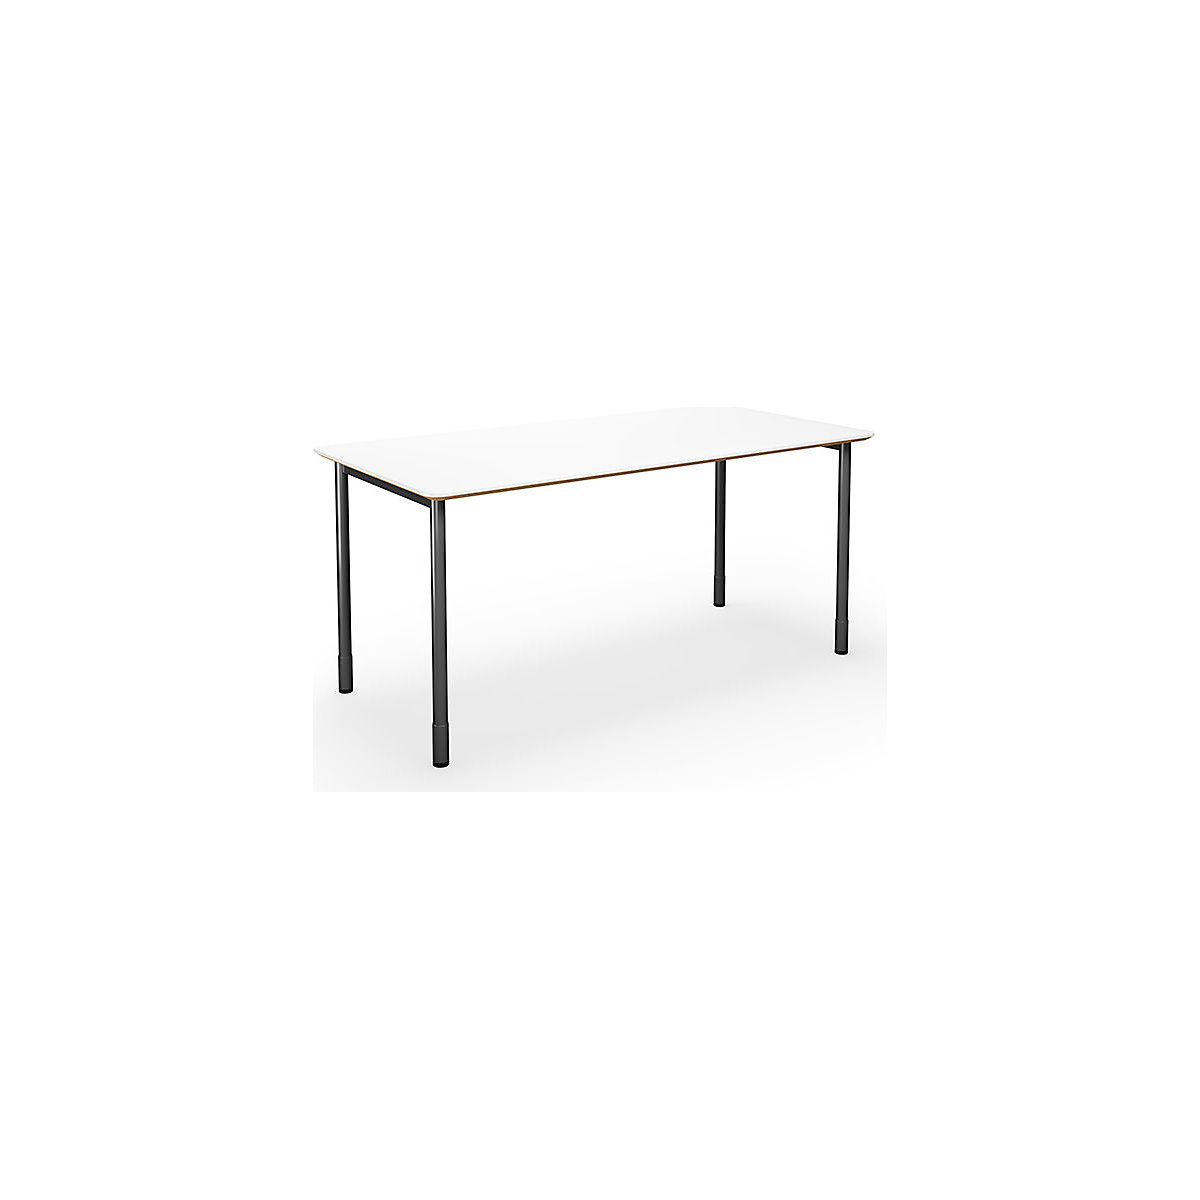 DUO-C Trend multi-purpose desk, straight tabletop, rounded corners, WxD 1600 x 800 mm, white, black-5